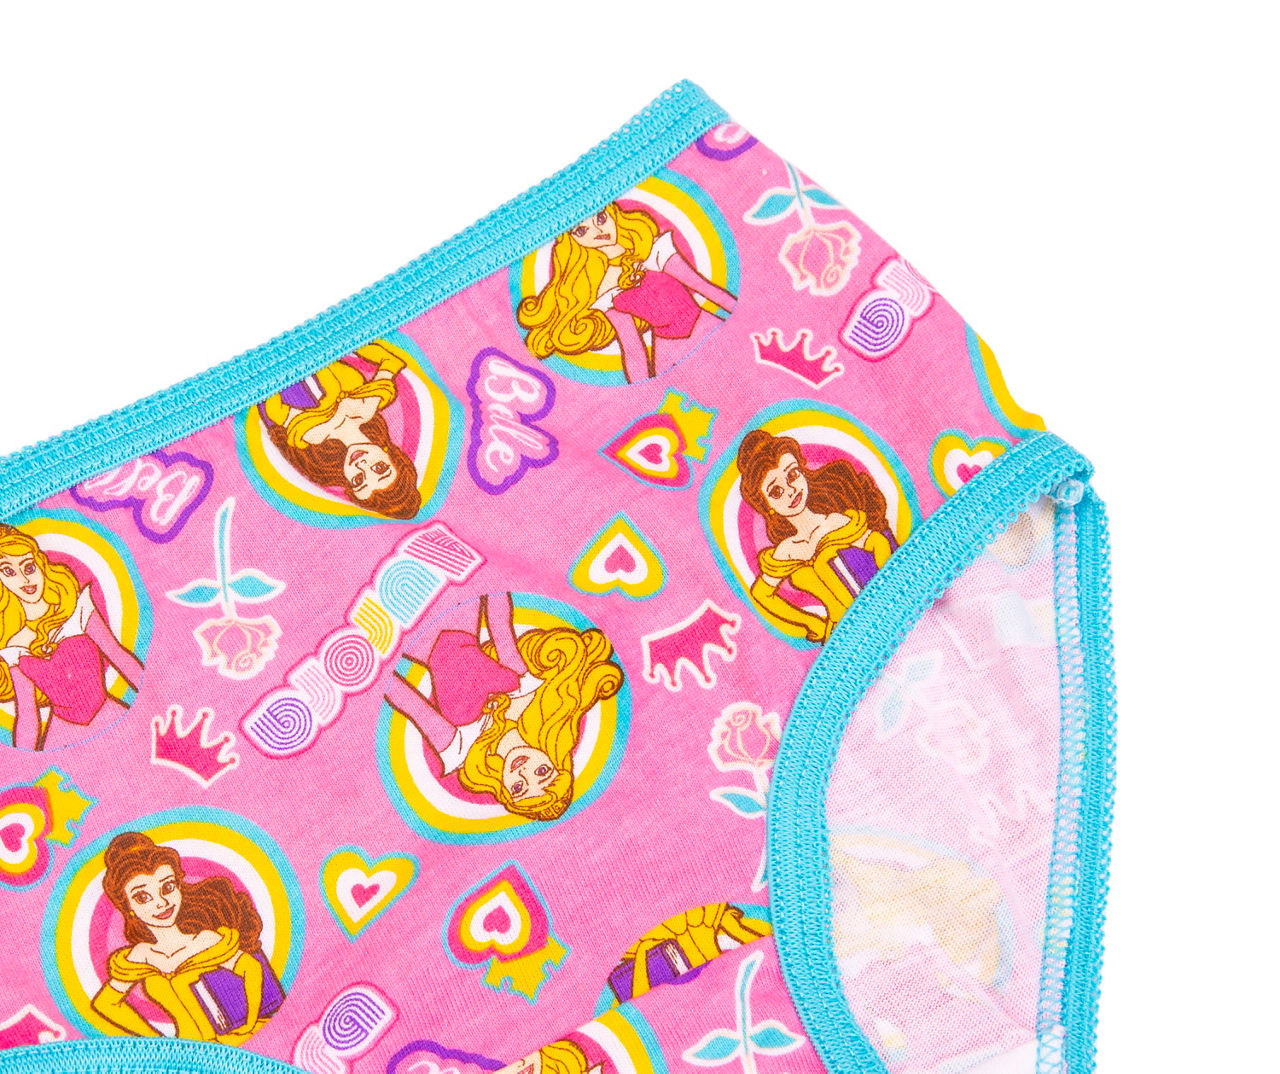 Disney Princess Toddler Size 4T White, Pink & Purple Briefs With Coloring  Page, 5-Pack